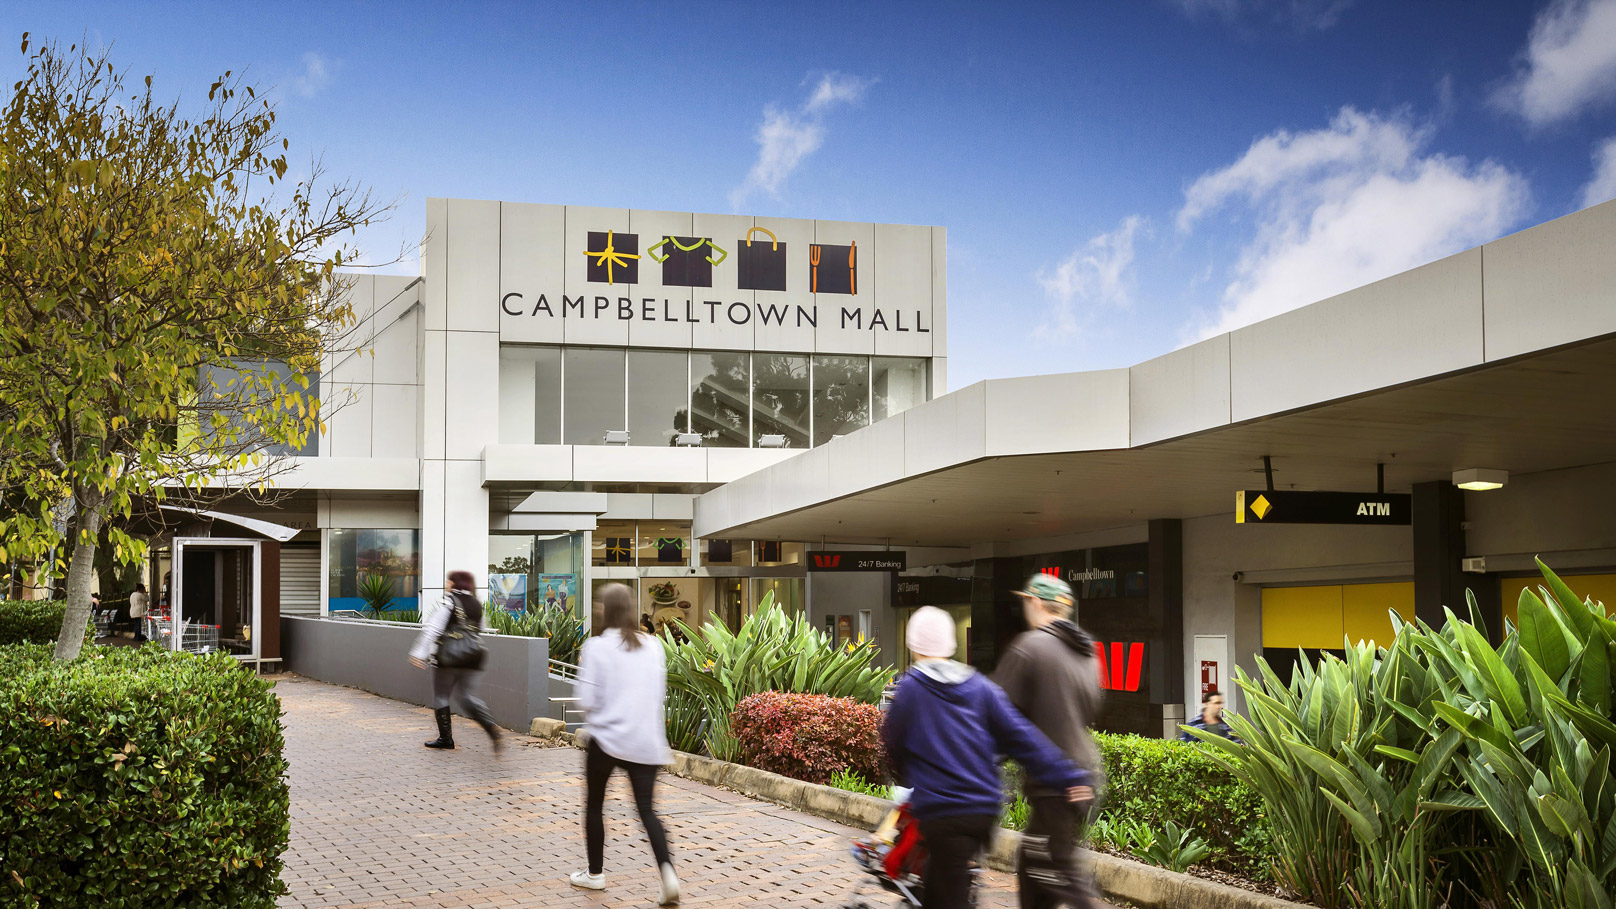 Commercial Entrance Mats for Campbelltown Mall